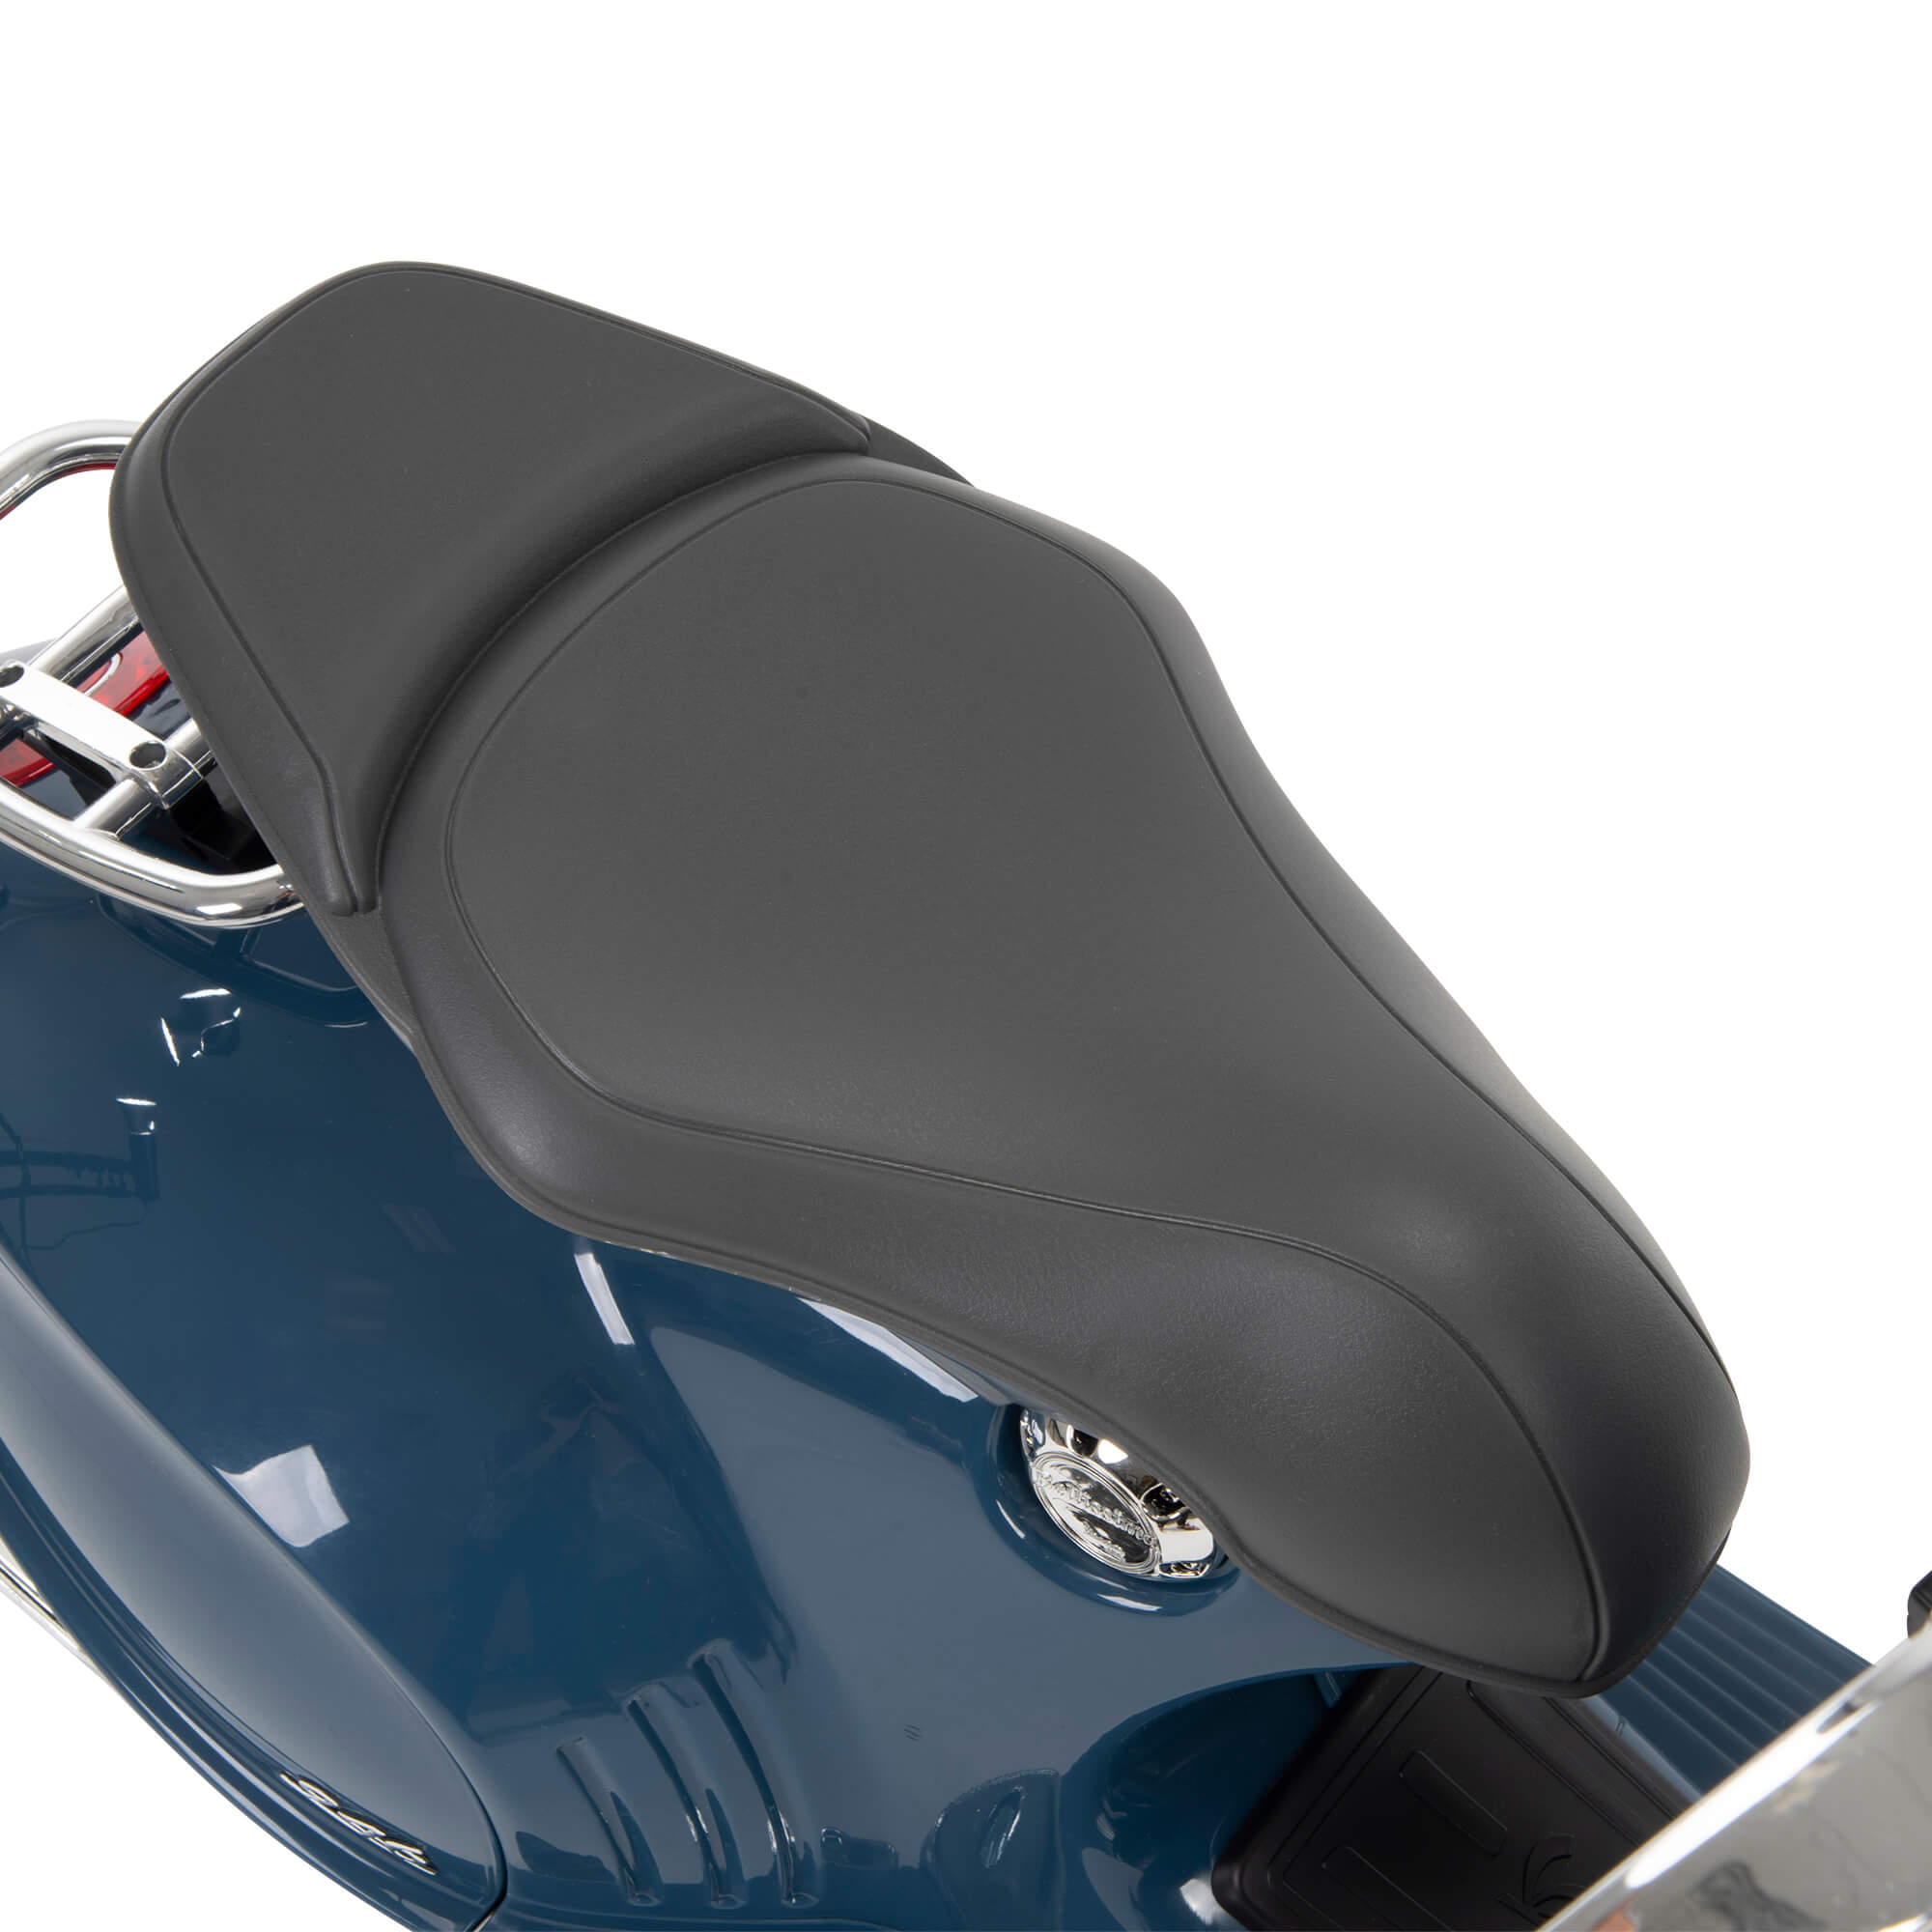 Huffy 6V Vespa Ride-On Electric Scooter for Kids, Blue - image 5 of 7